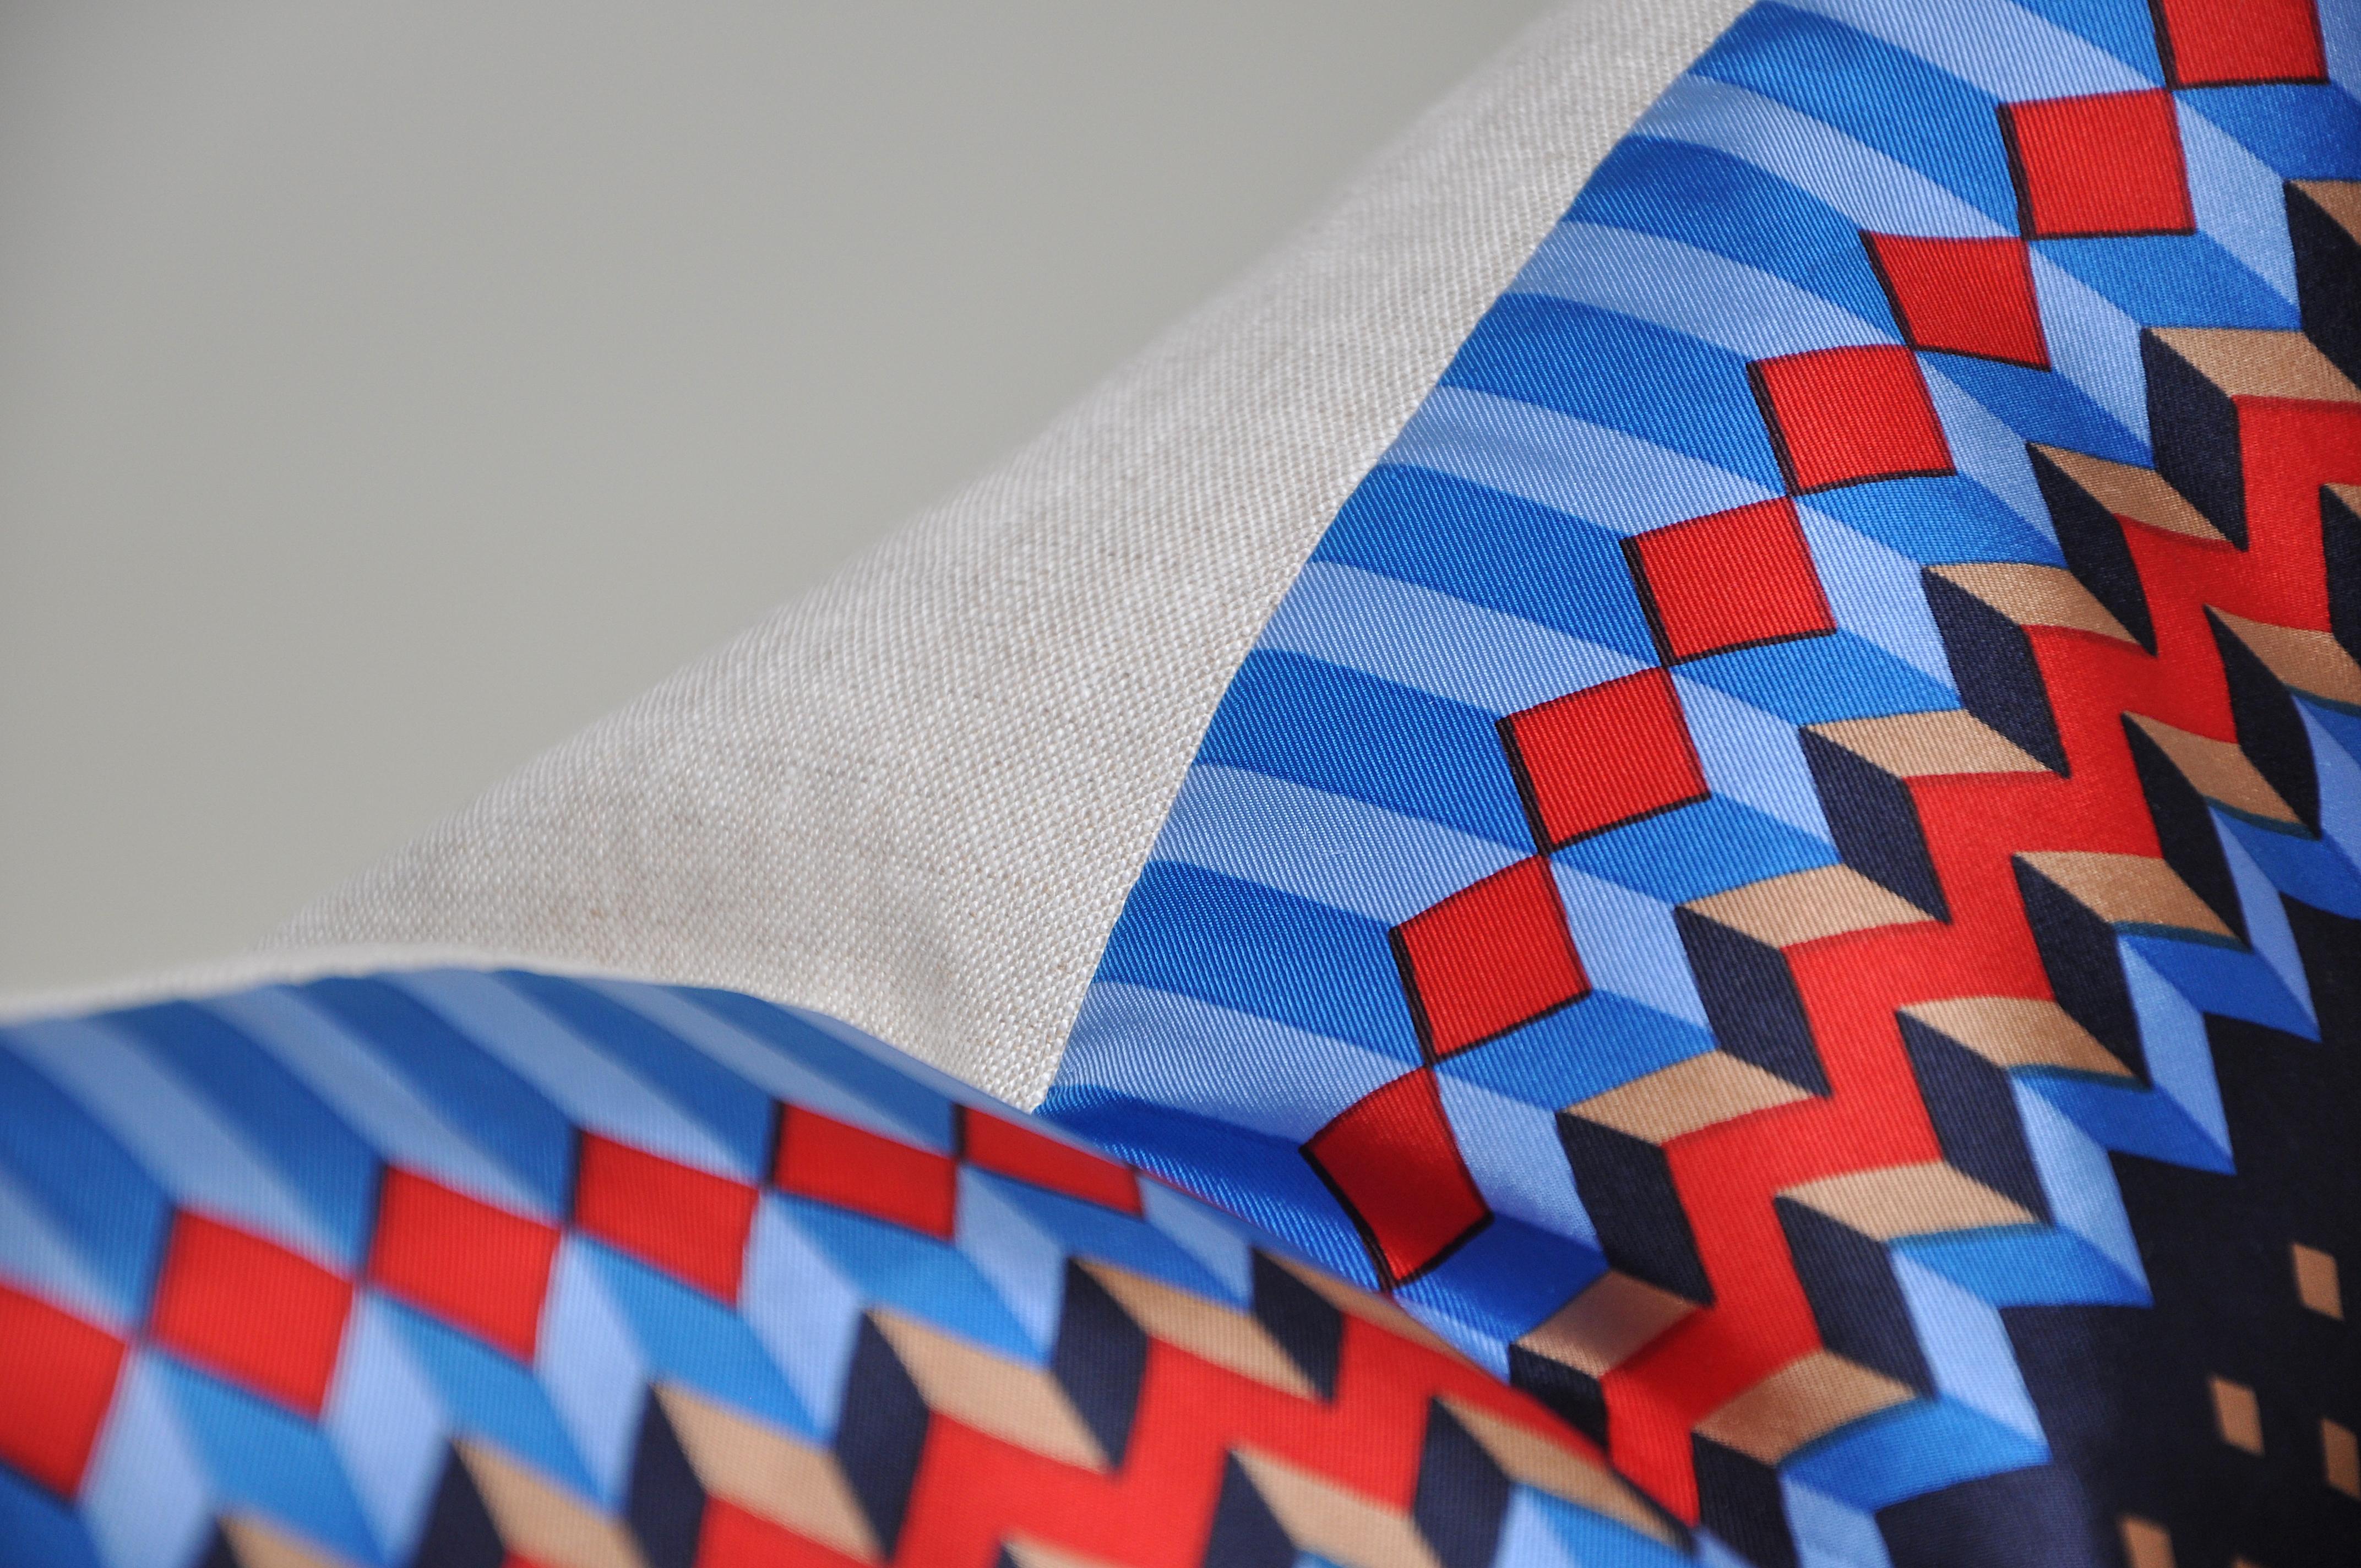 Mid-Century Modern Vintage Geometric Red Blue YSL Fabric Cushion with Irish Linen Pillow For Sale